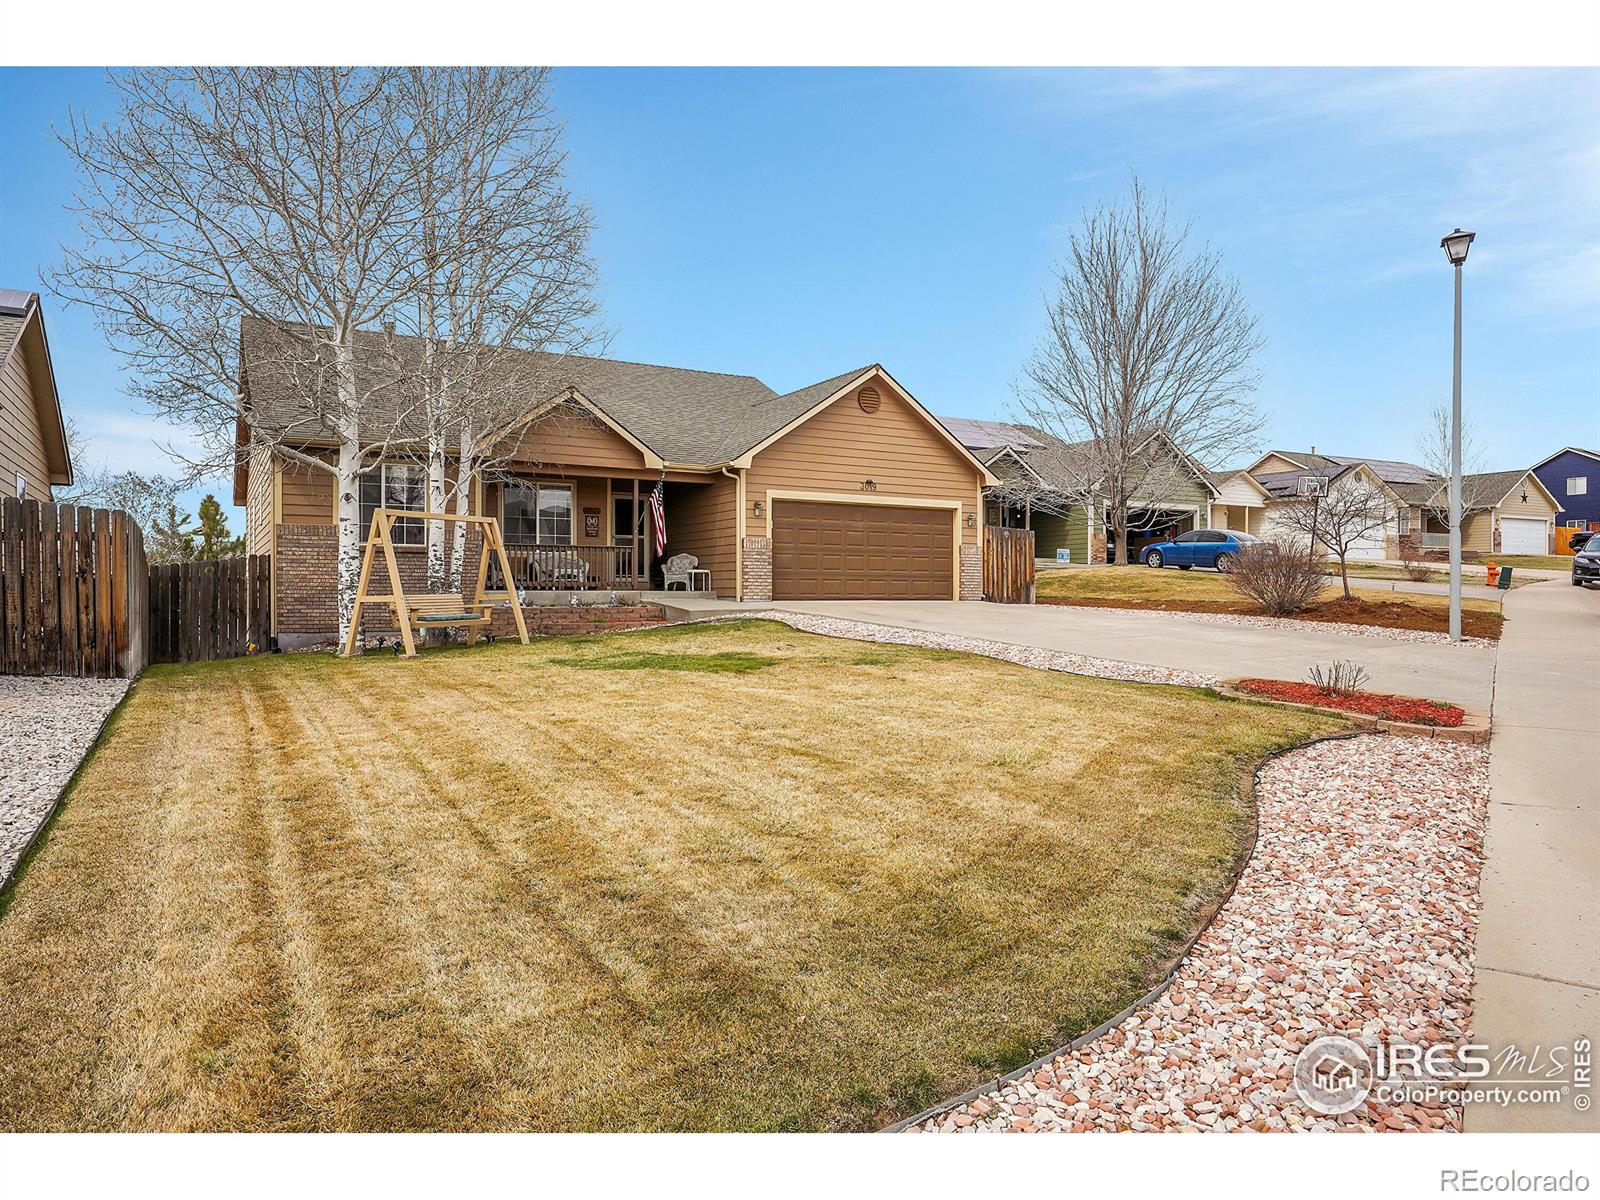 3019  45th Avenue, greeley MLS: 4567891004814 Beds: 6 Baths: 3 Price: $515,000